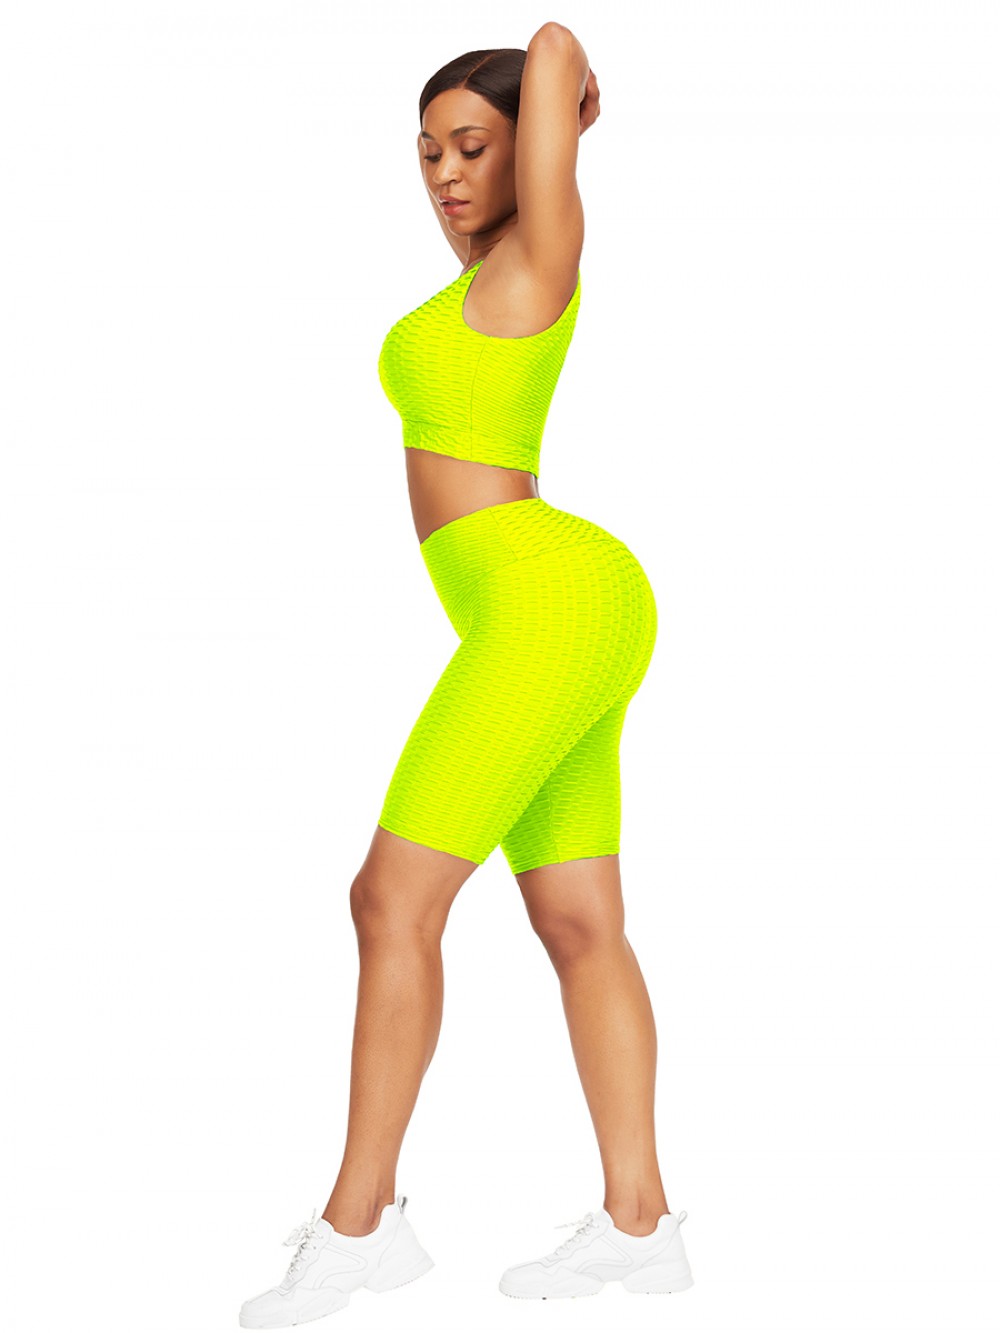 Lavish Yellow Scoop Neck Training Suits High Waist Young Style